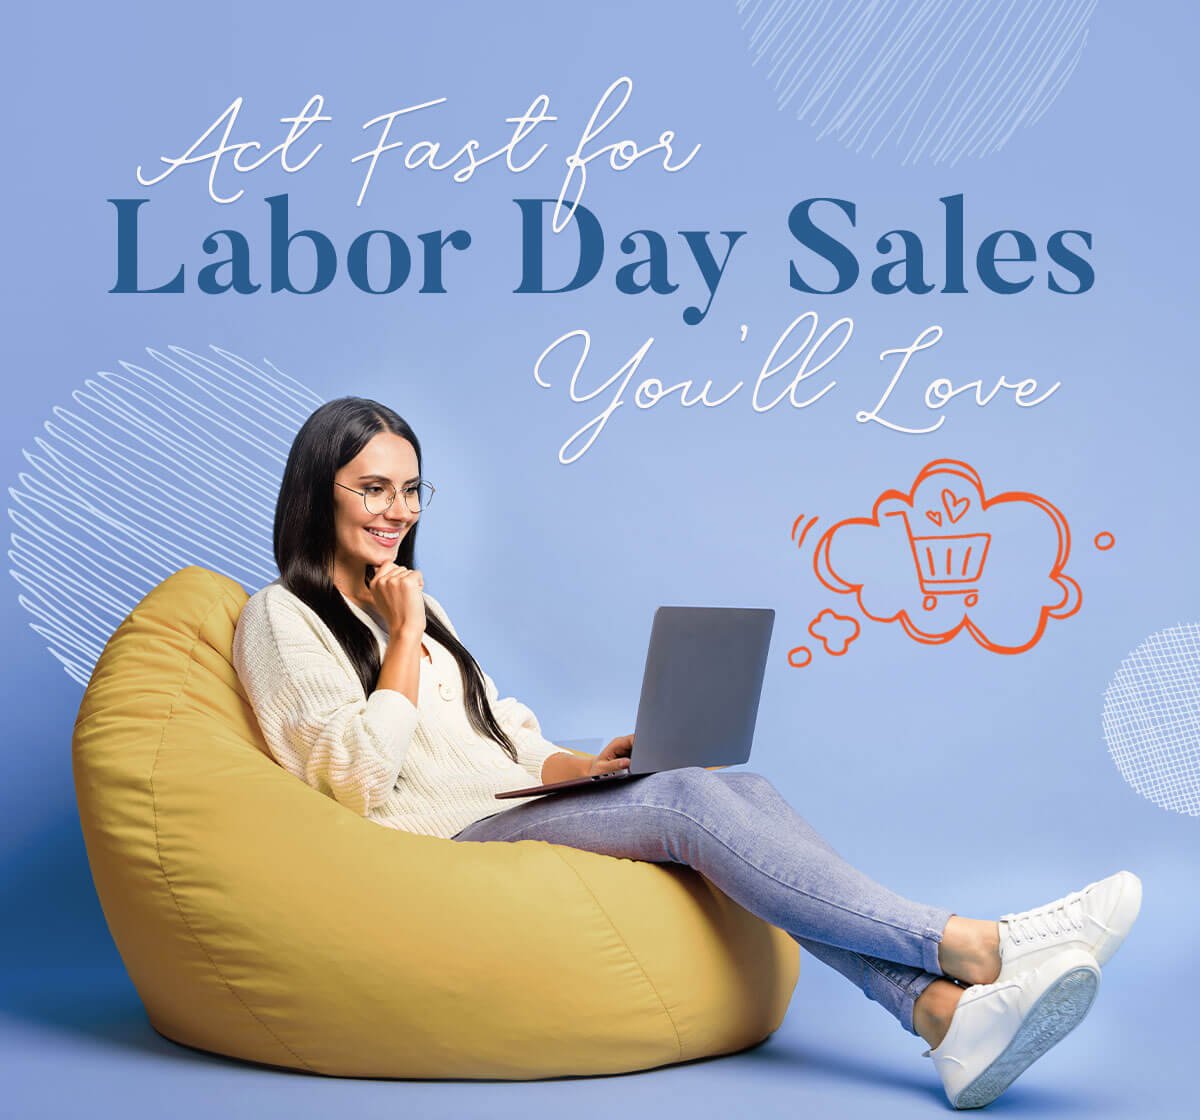 Act fast for Labor Day sales you’ll love